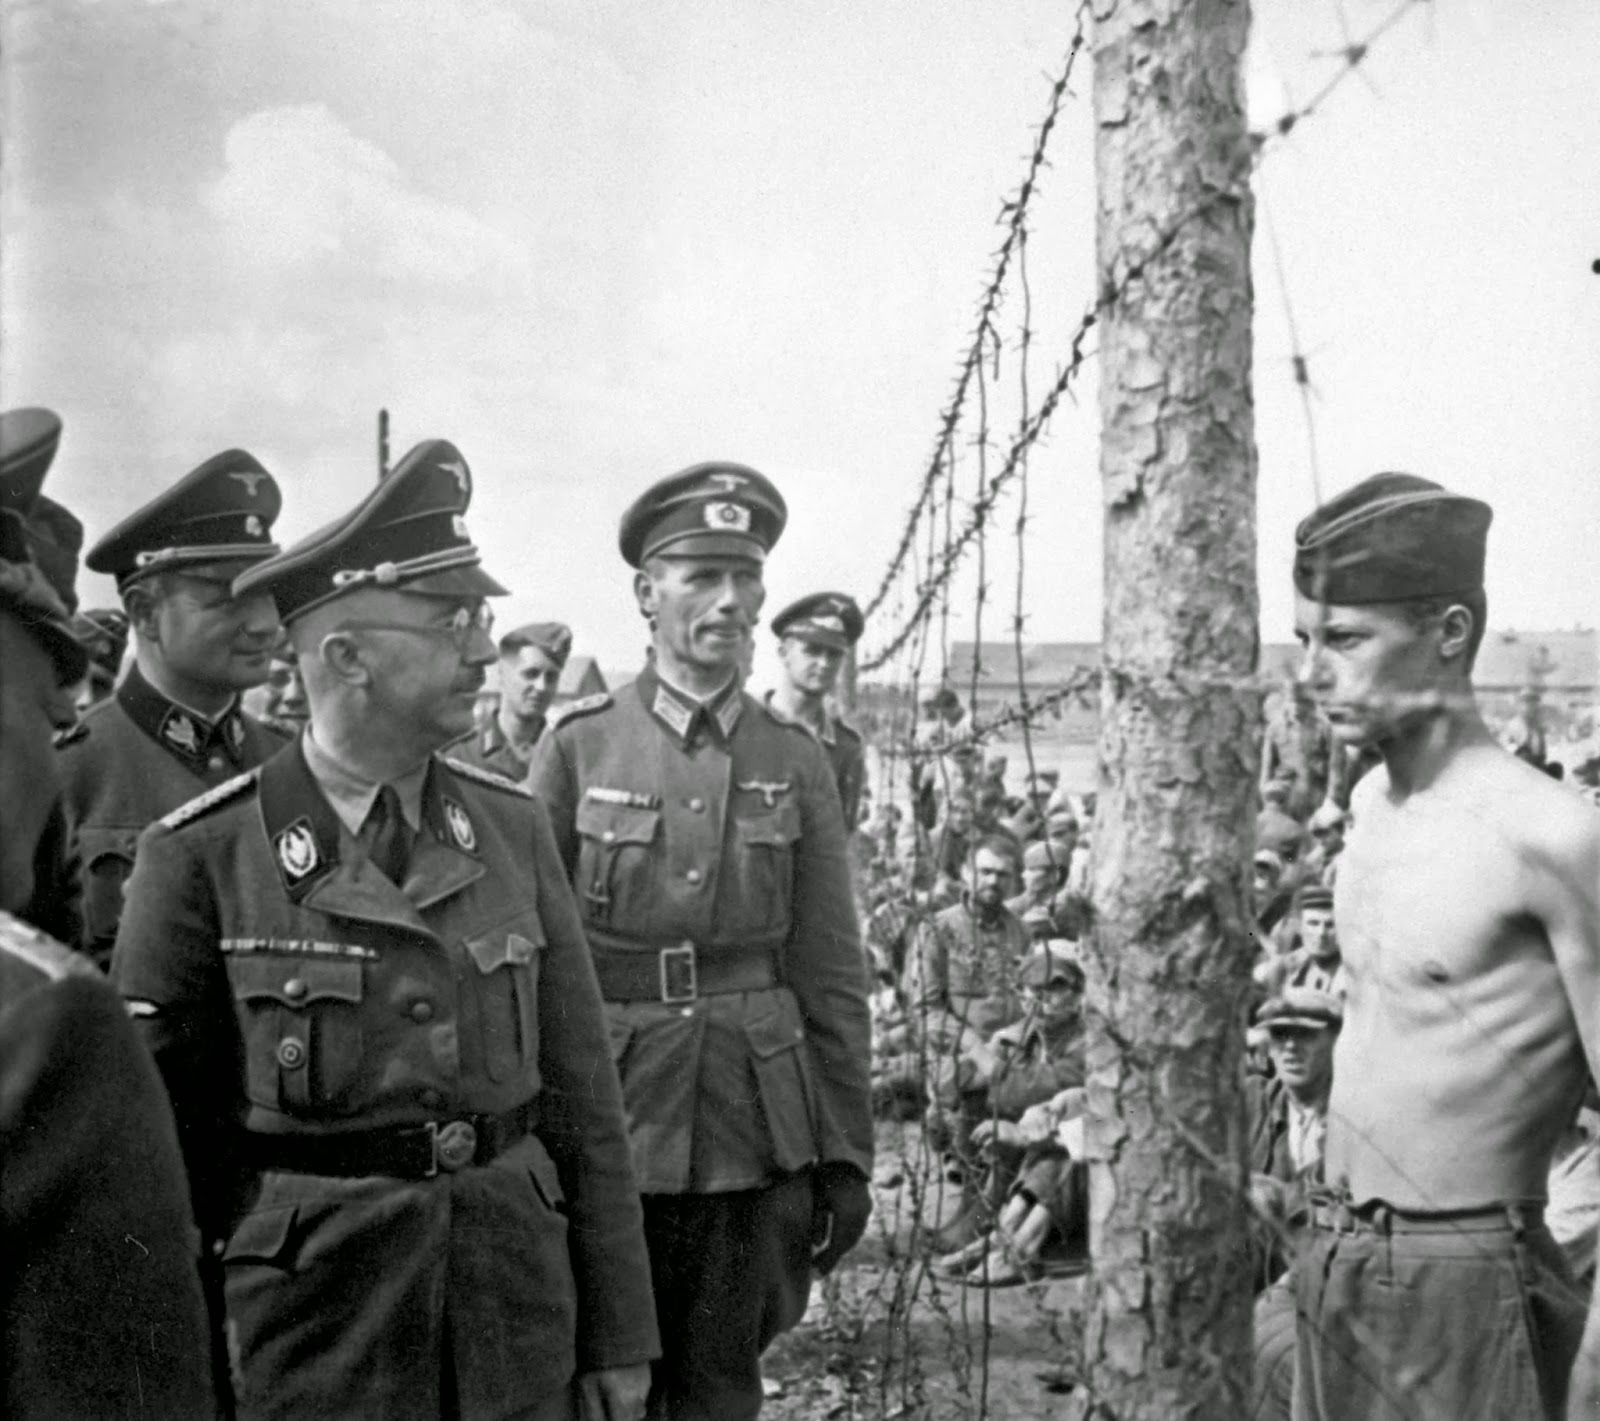 Himmler+and+a+prisoner+locked+in+a+staring+contest+The+Defiance.jpg